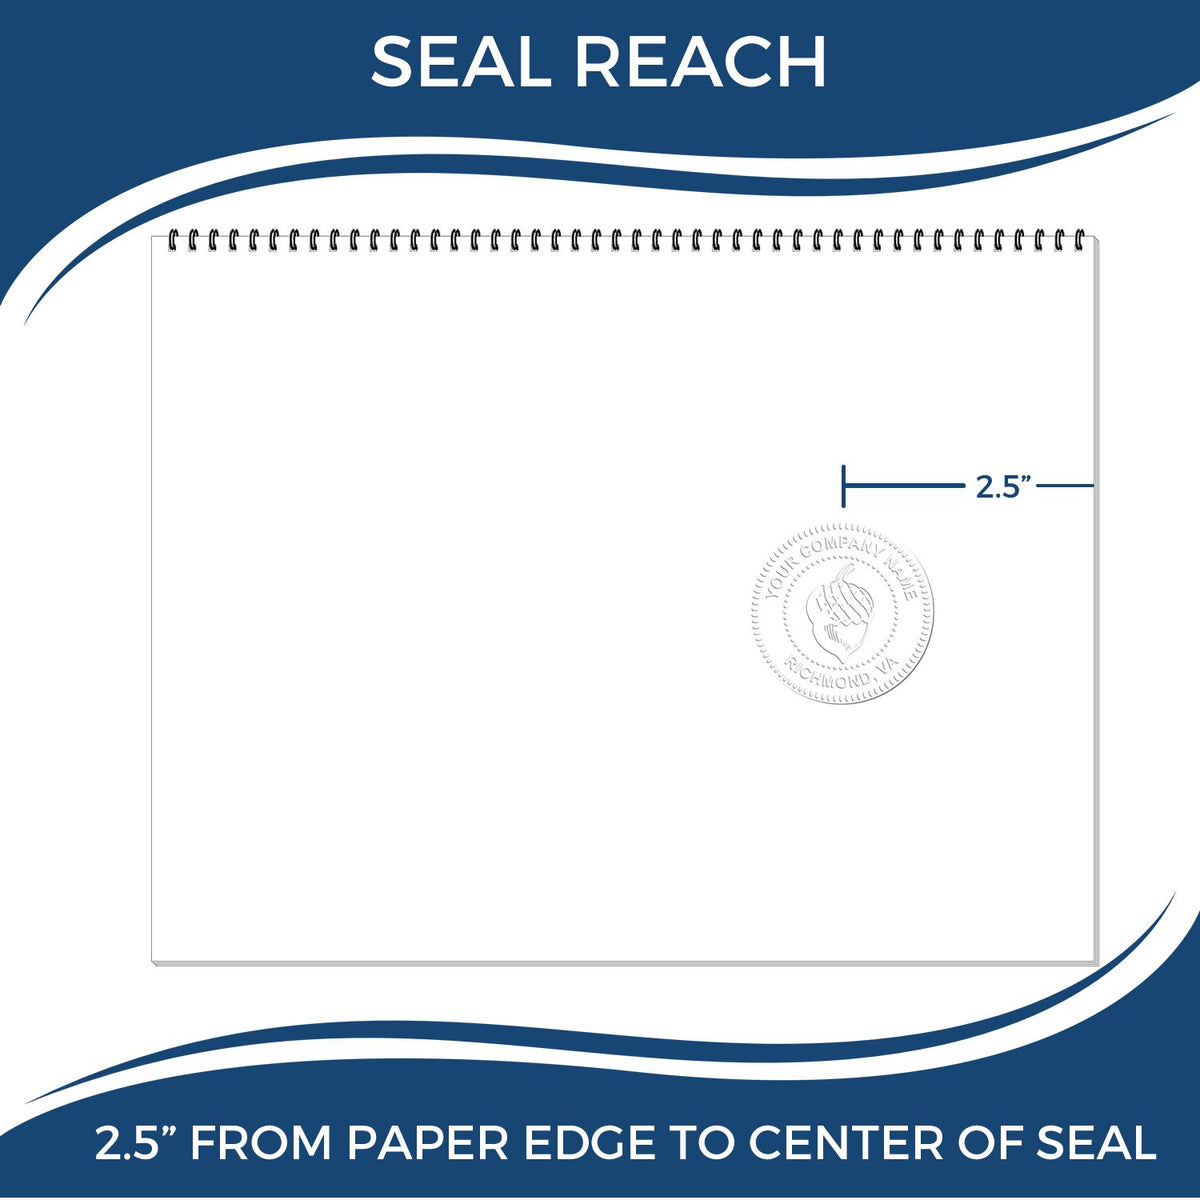 An infographic showing the seal reach which is represented by a ruler and a miniature seal image of the Long Reach Georgia Geology Seal